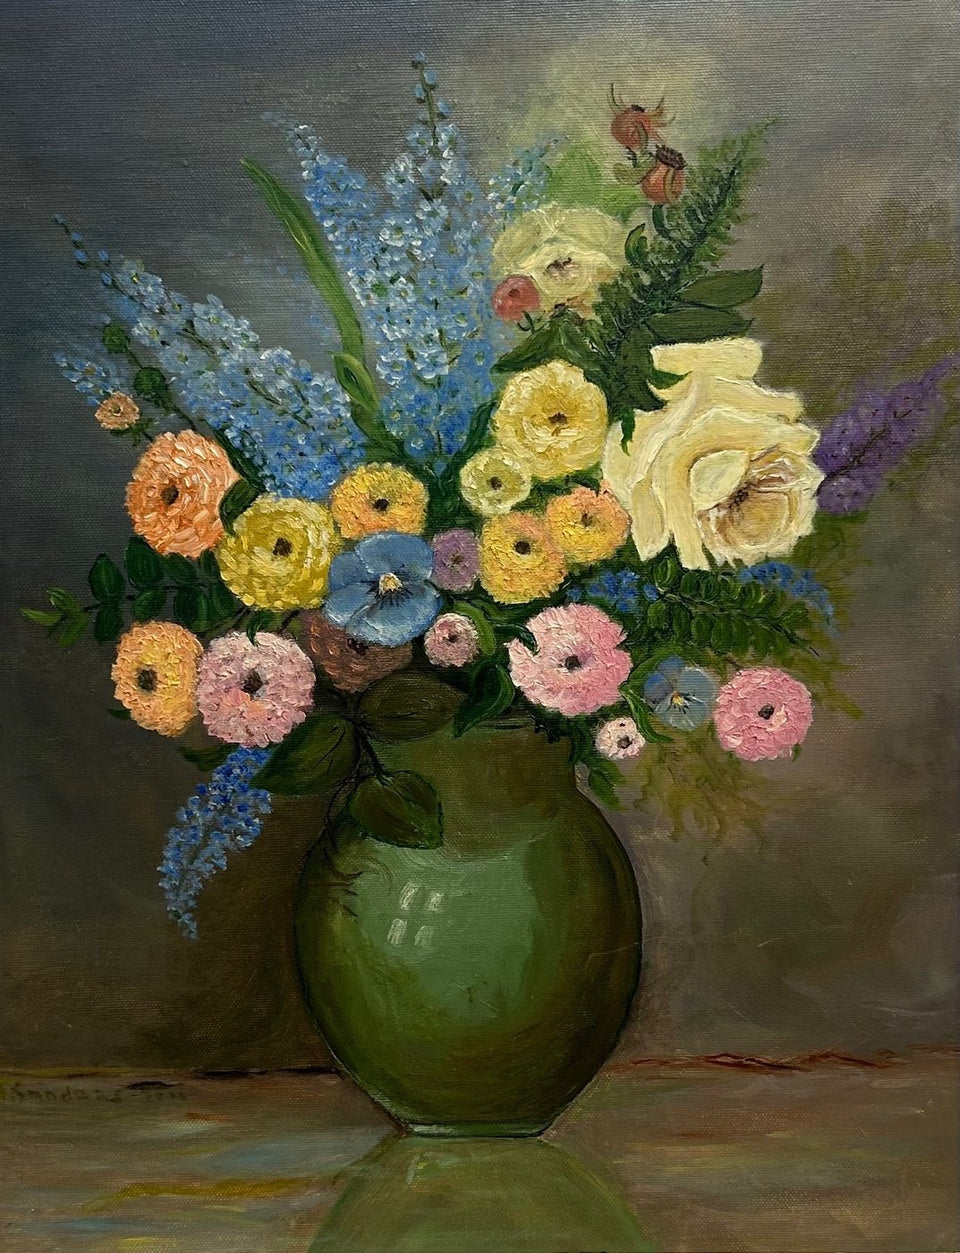 Oil painting - Still life with bouquet with Spring flowers